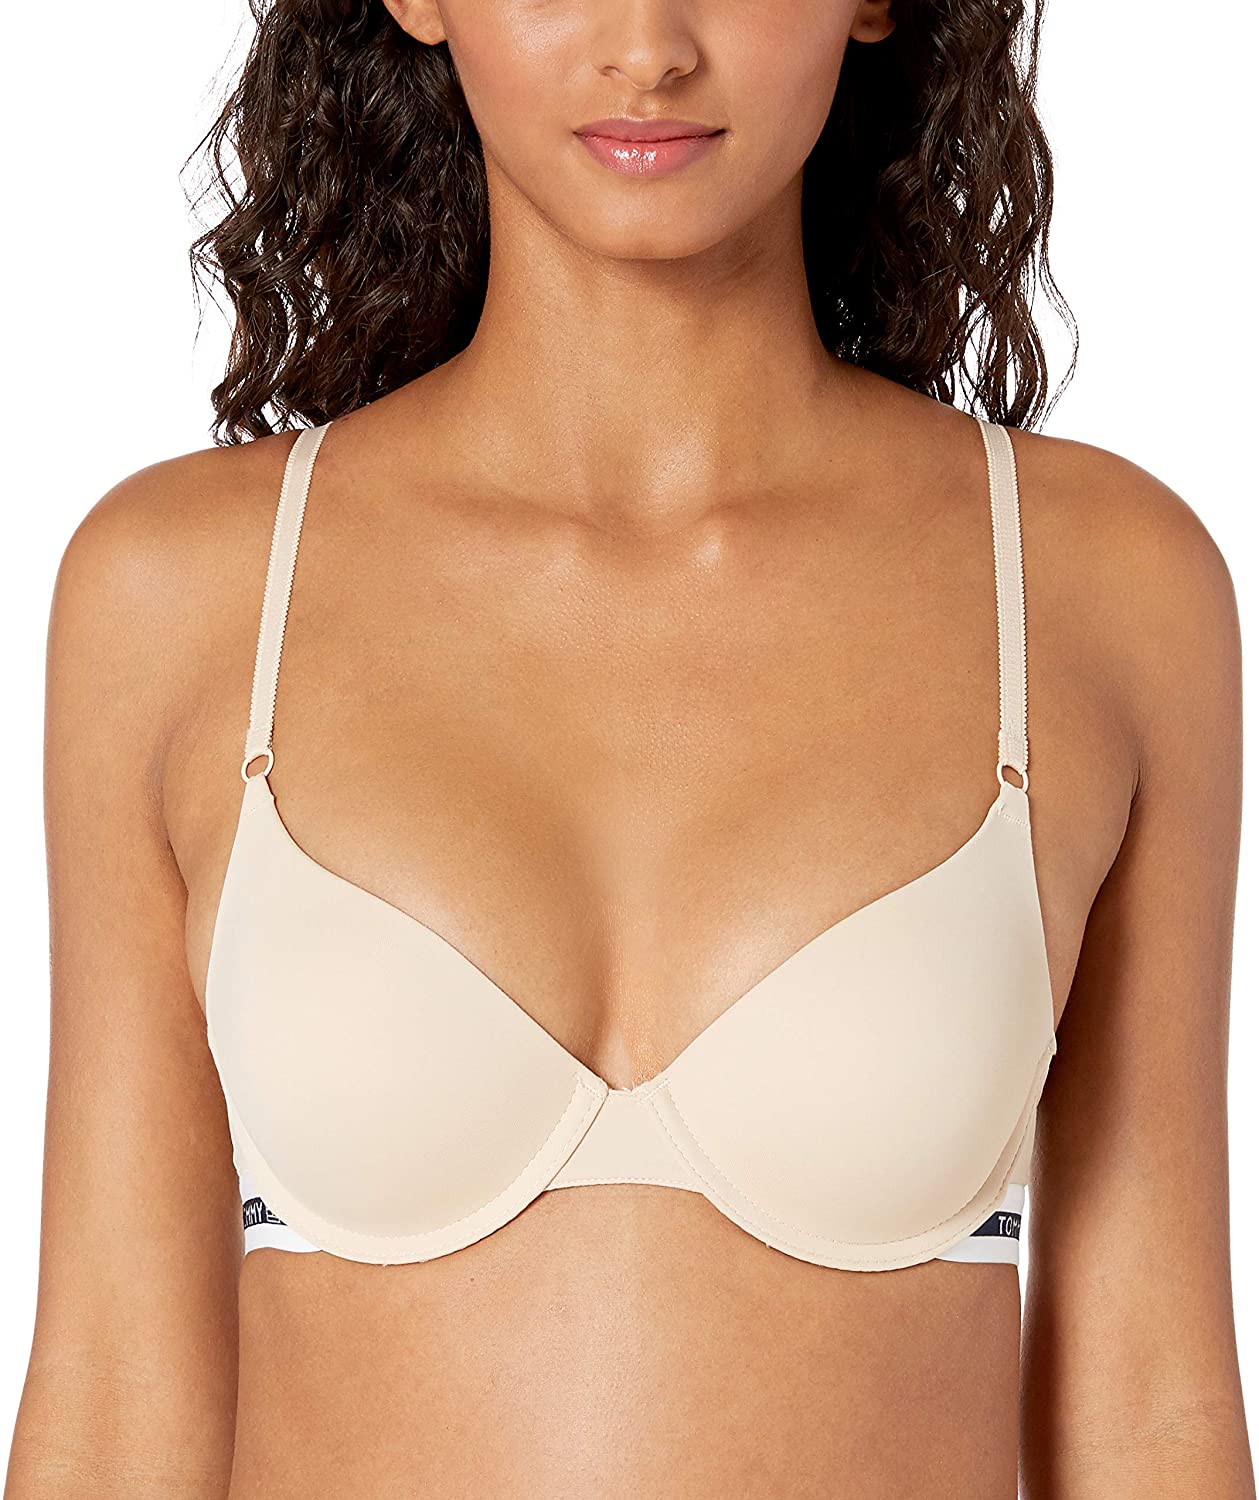 Price:$16.76 Tommy Hilfiger Women's Basic Comfort Push up Underwire Bra, Nude, 38B at Amazon Women’s Clothing store